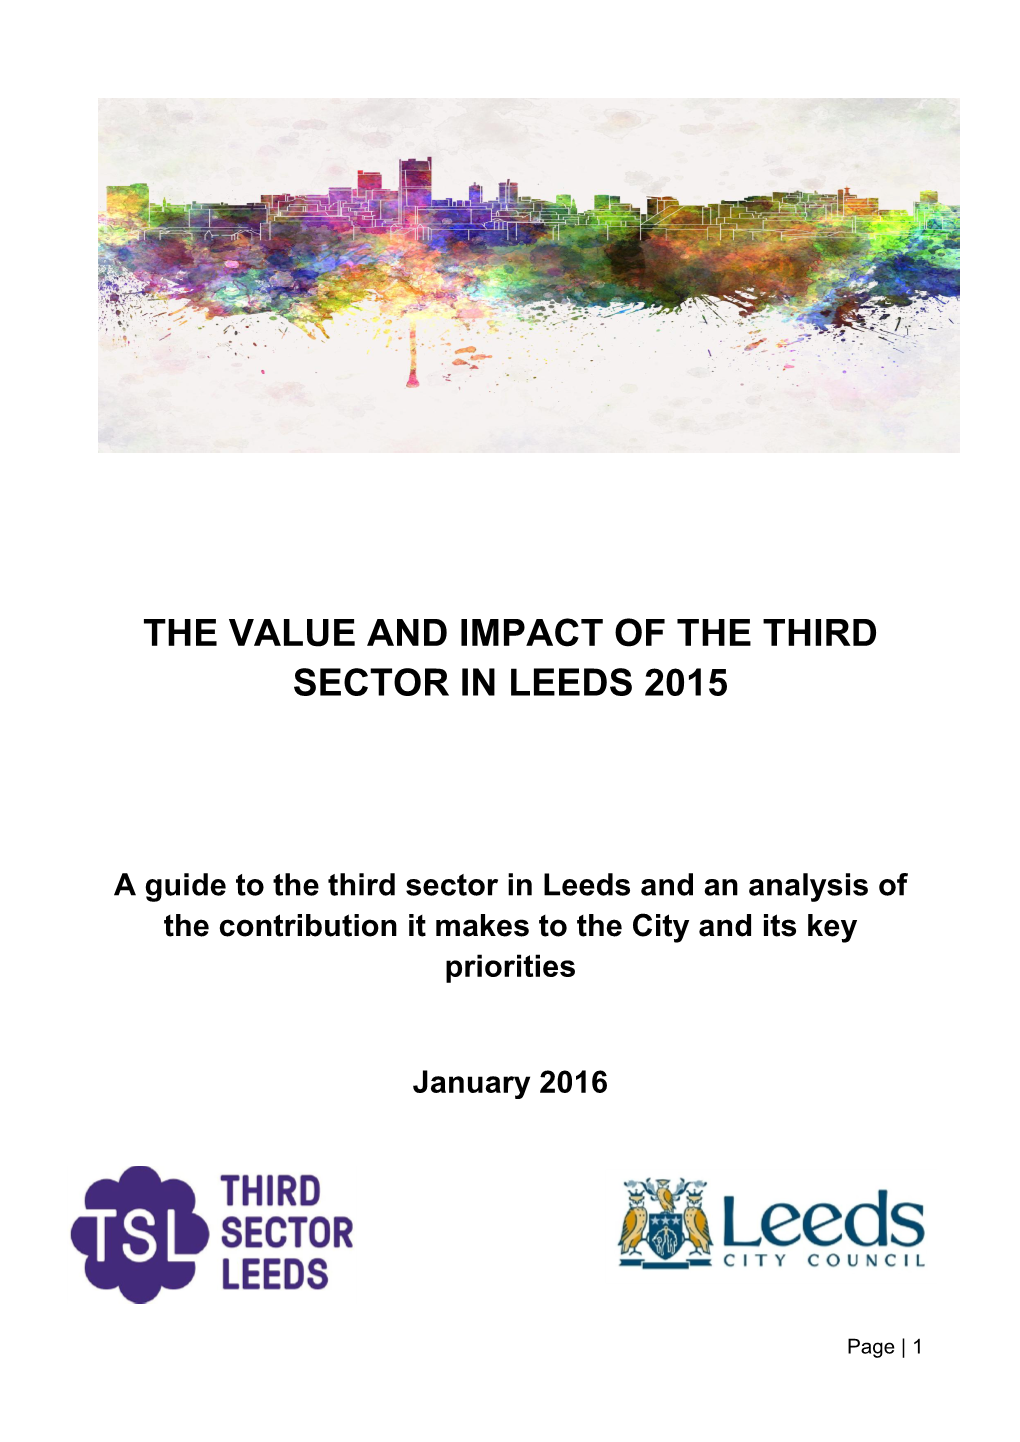 The Value and Impact of the Third Sector in Leeds 2015